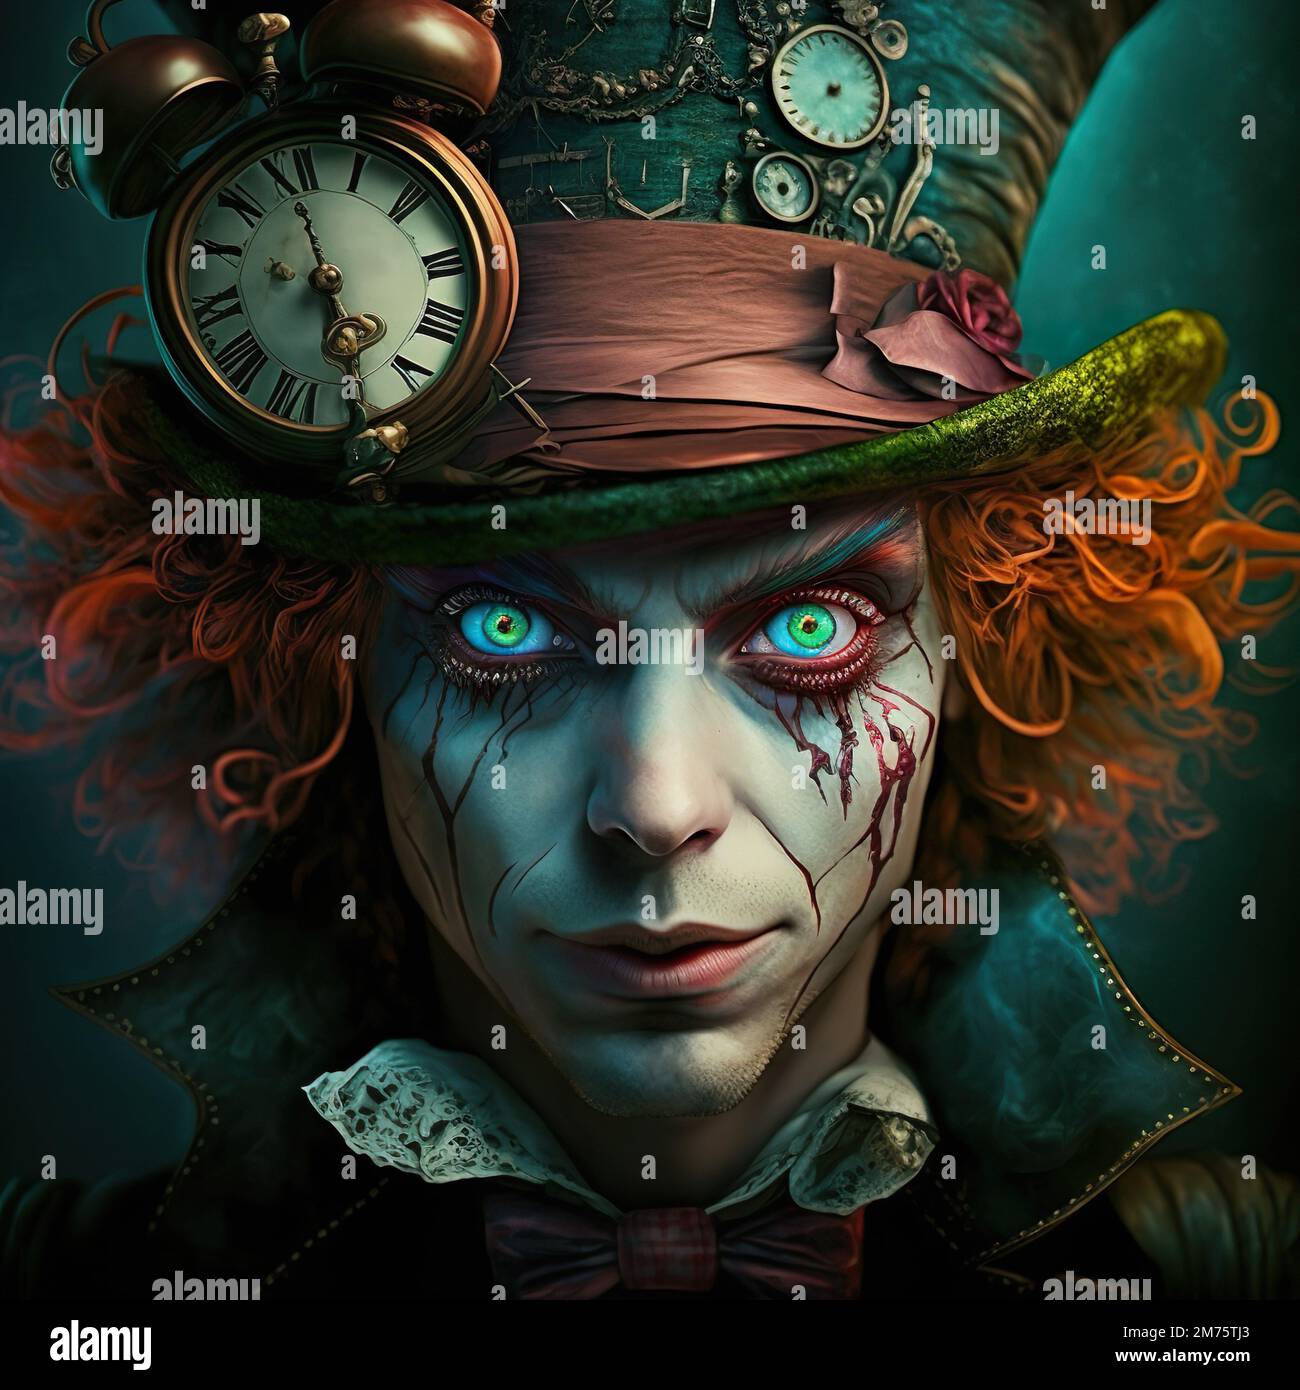 Mad hatter Stock Photos Royalty Free Mad hatter Images  Depositphotos